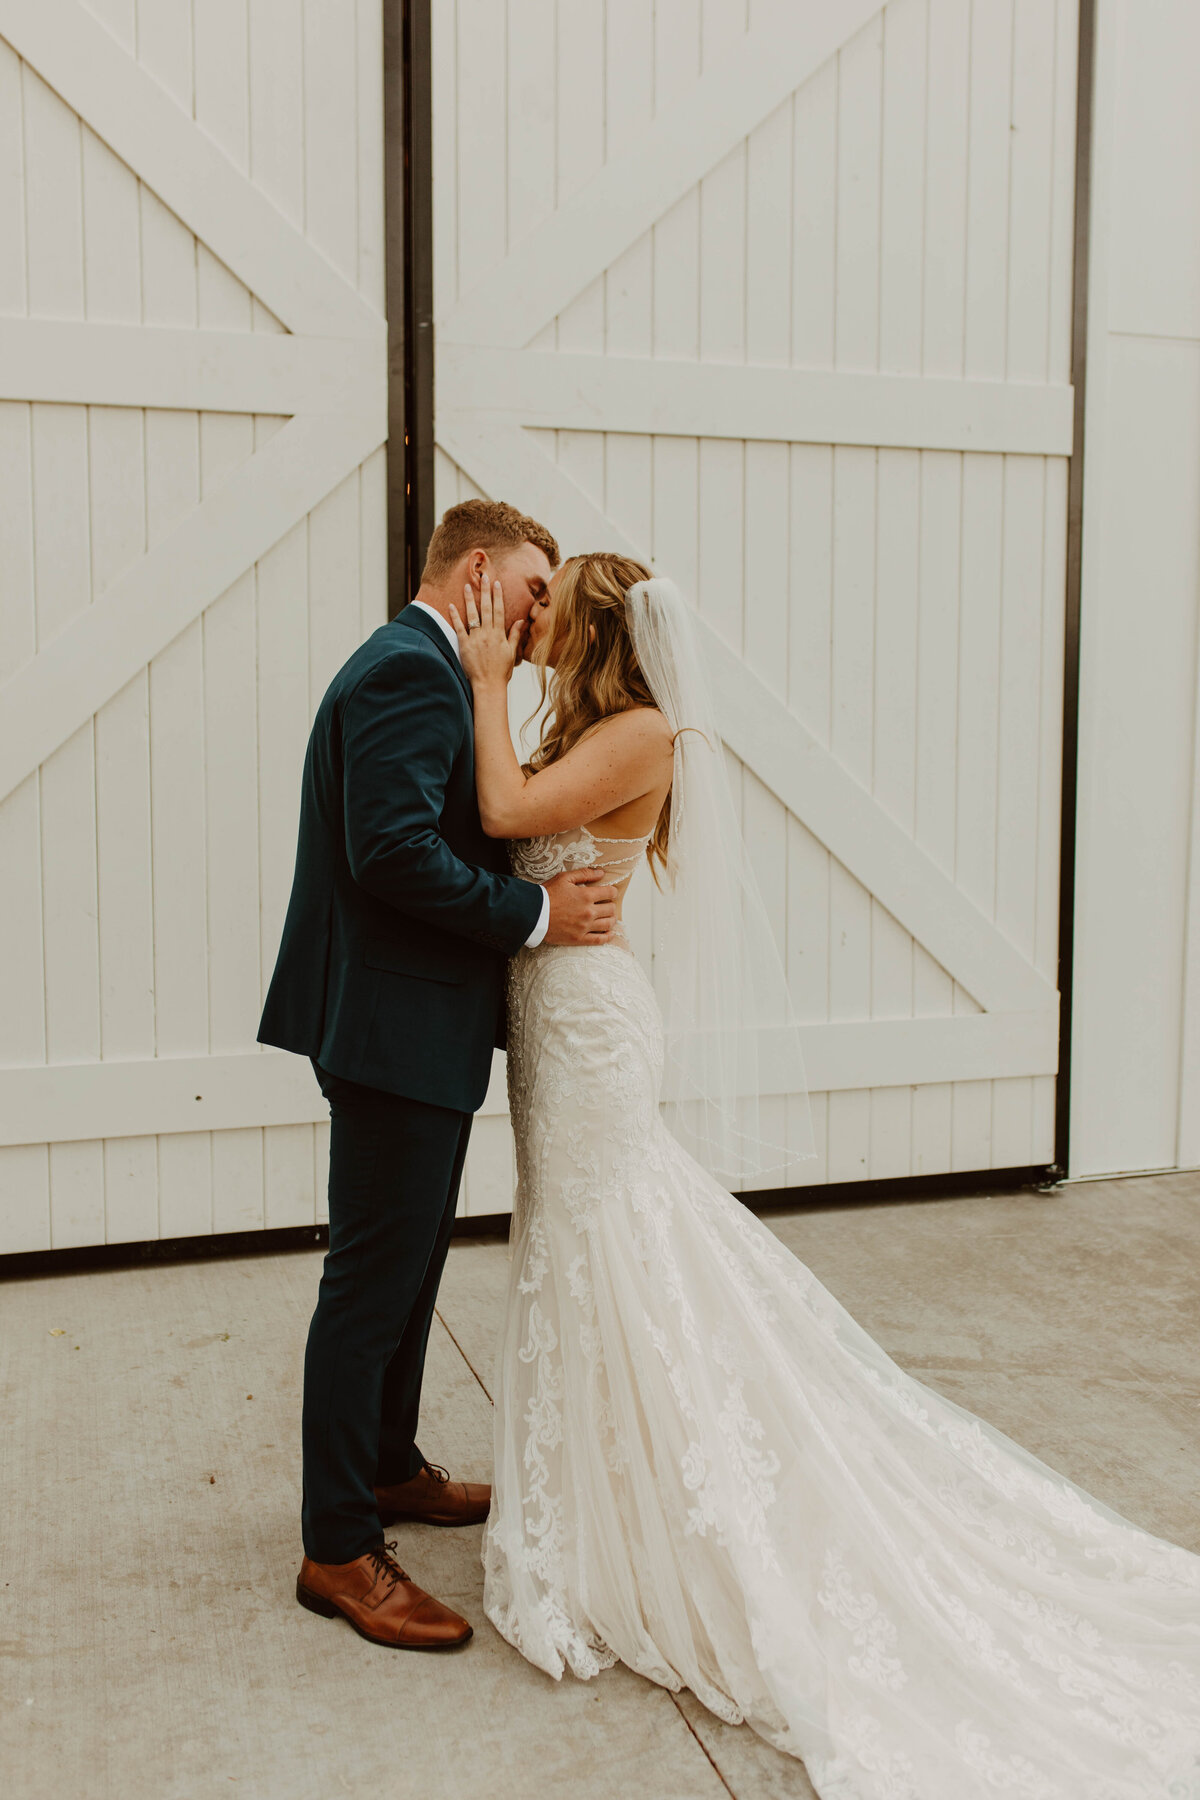 Bride and groom kissing in front of white barn doors.